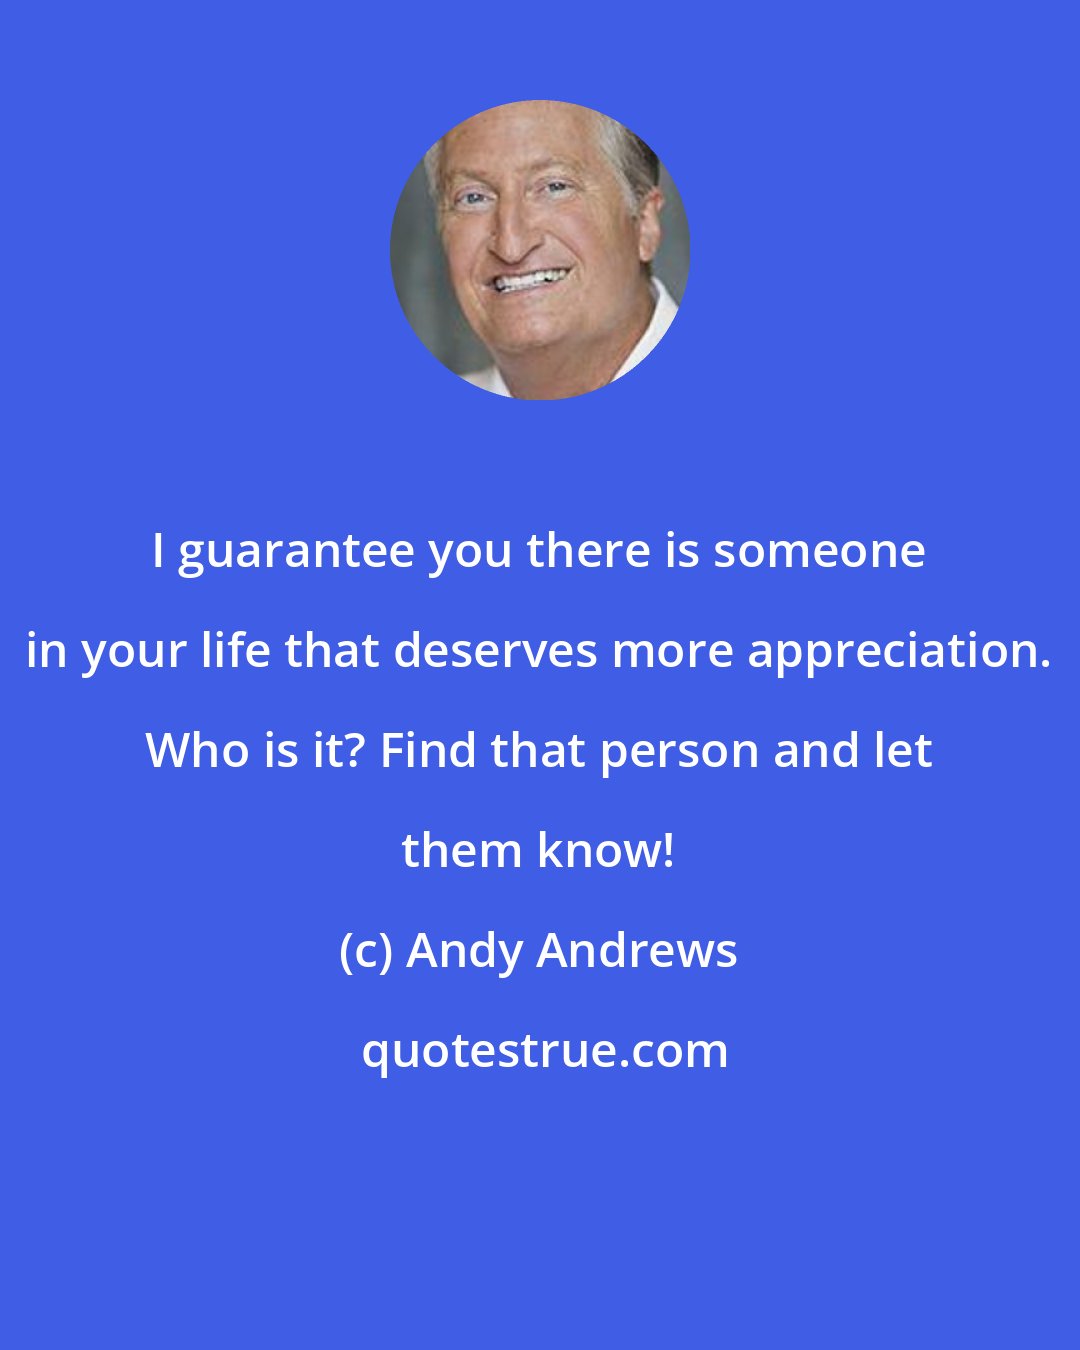 Andy Andrews: I guarantee you there is someone in your life that deserves more appreciation. Who is it? Find that person and let them know!